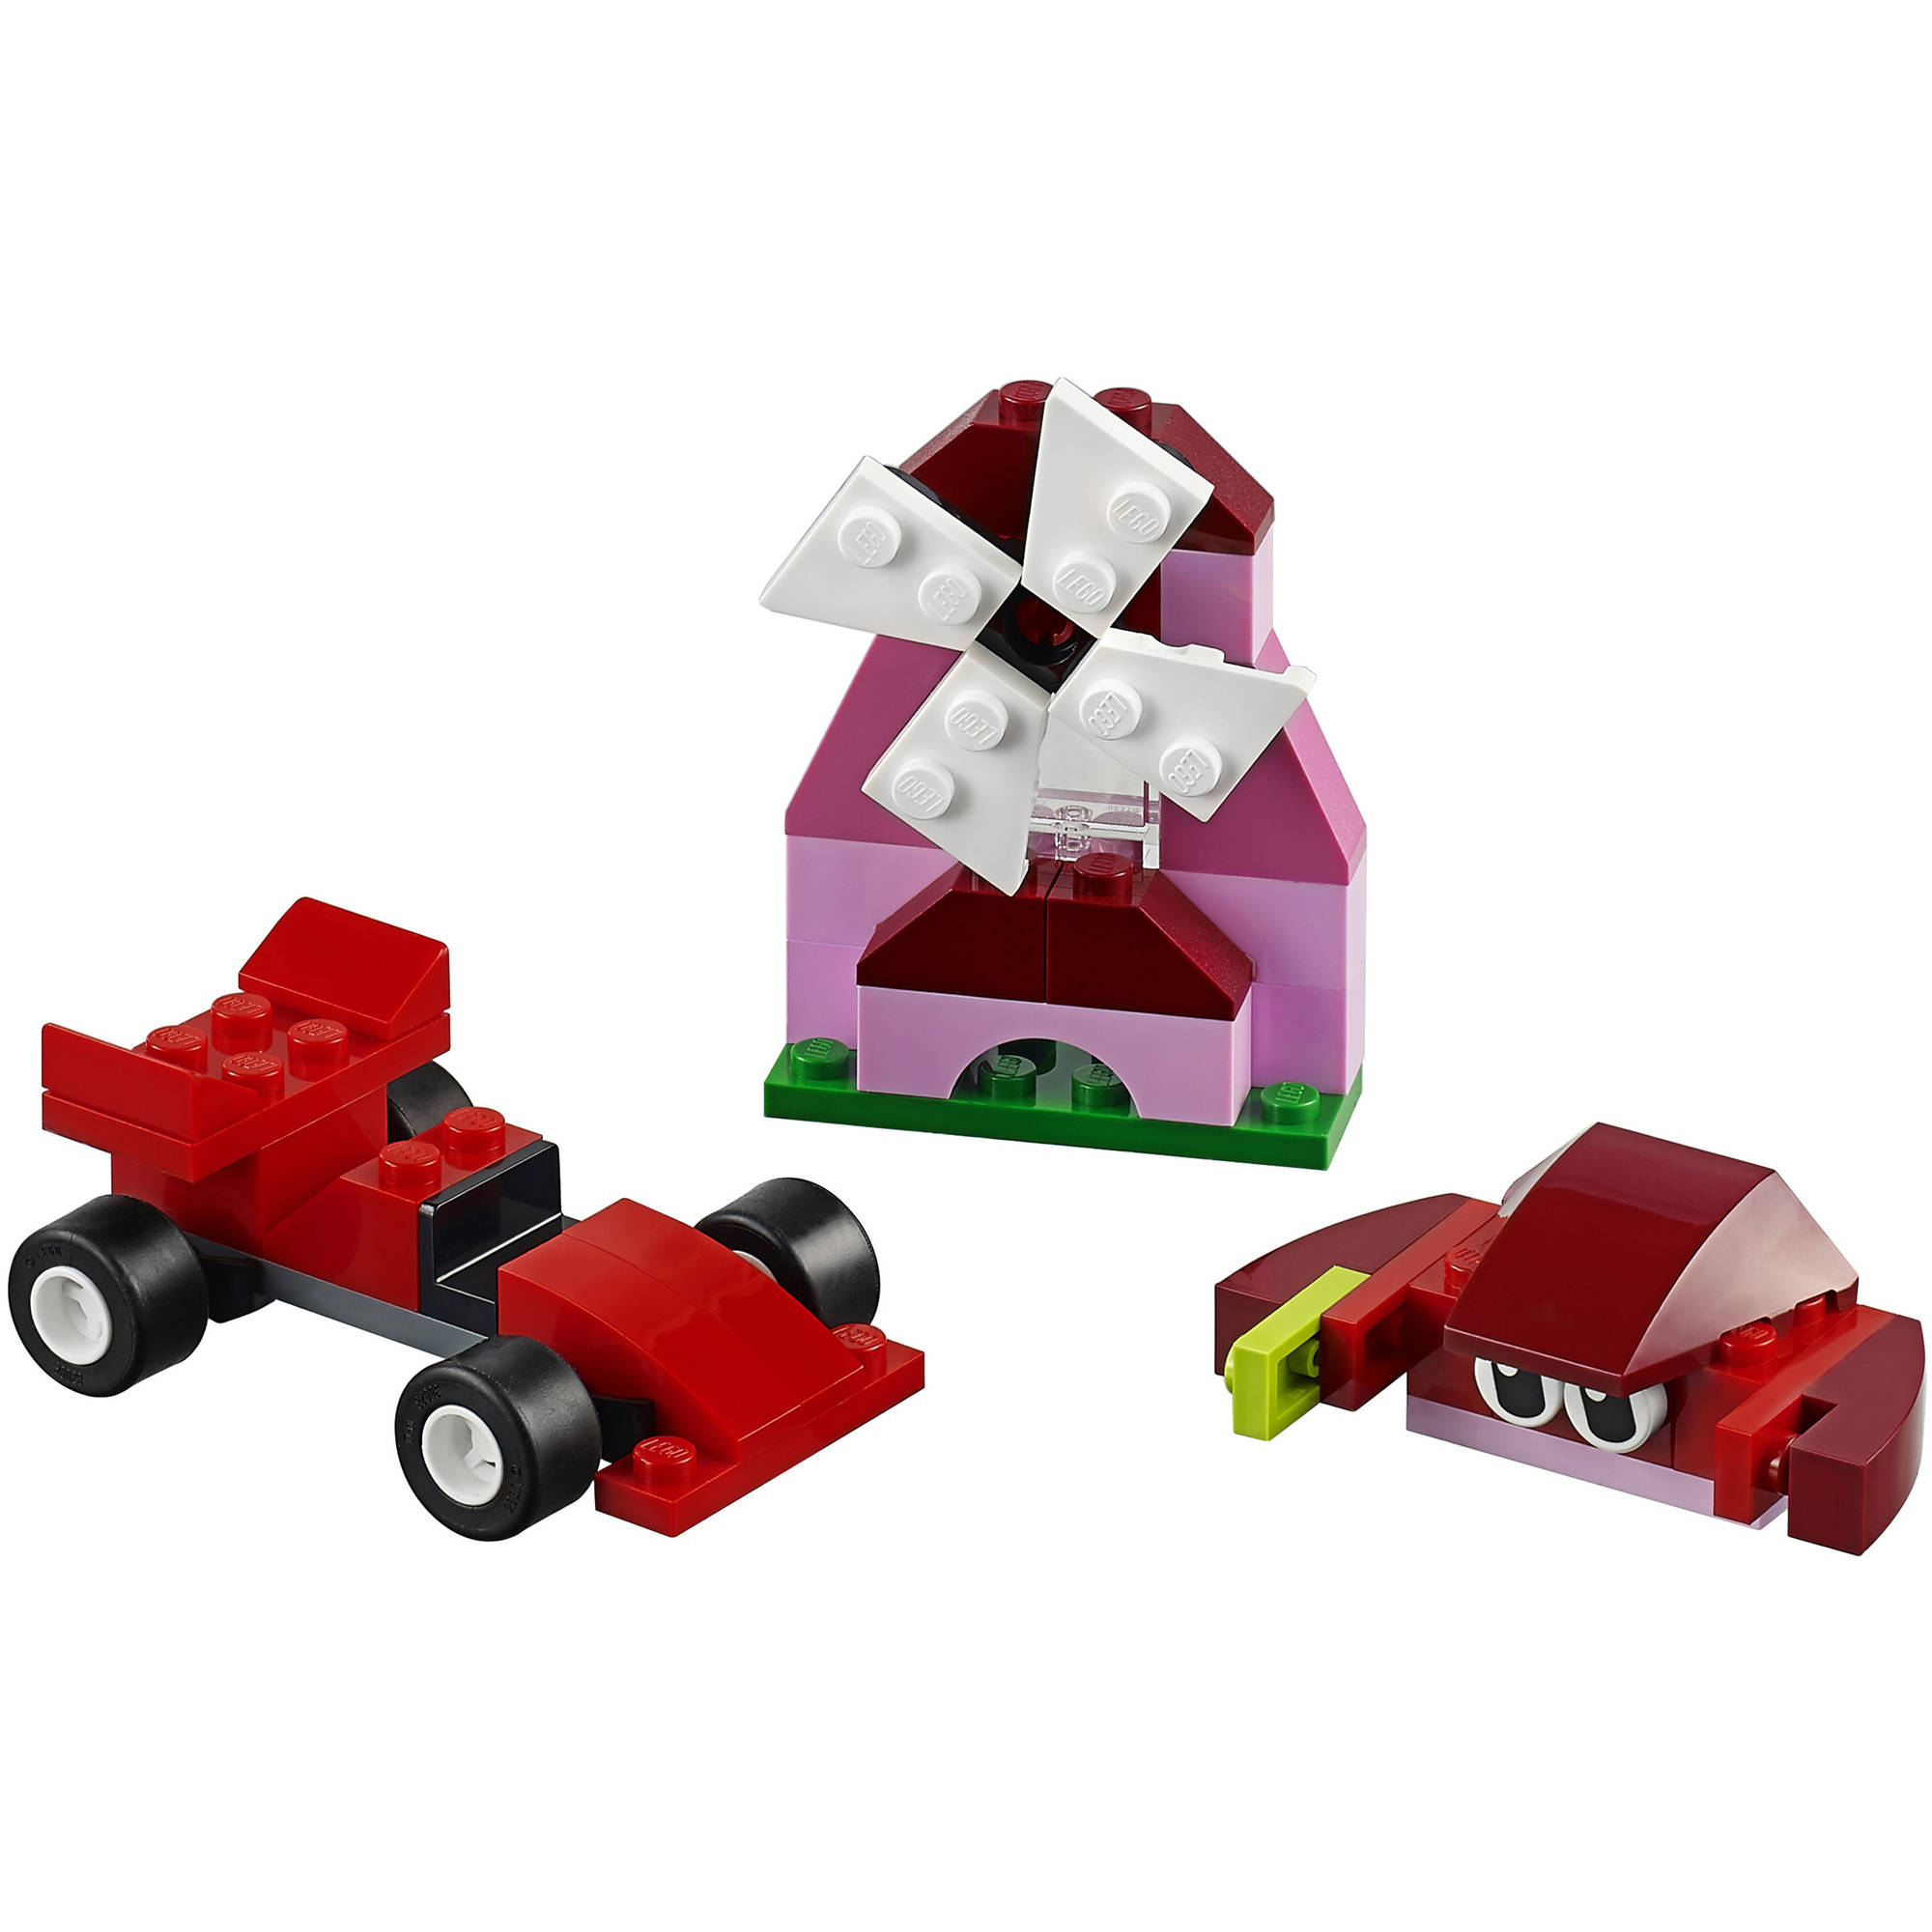 LEGO Classic Creativity Box, Red 10707 (55 Pieces) - image 4 of 8